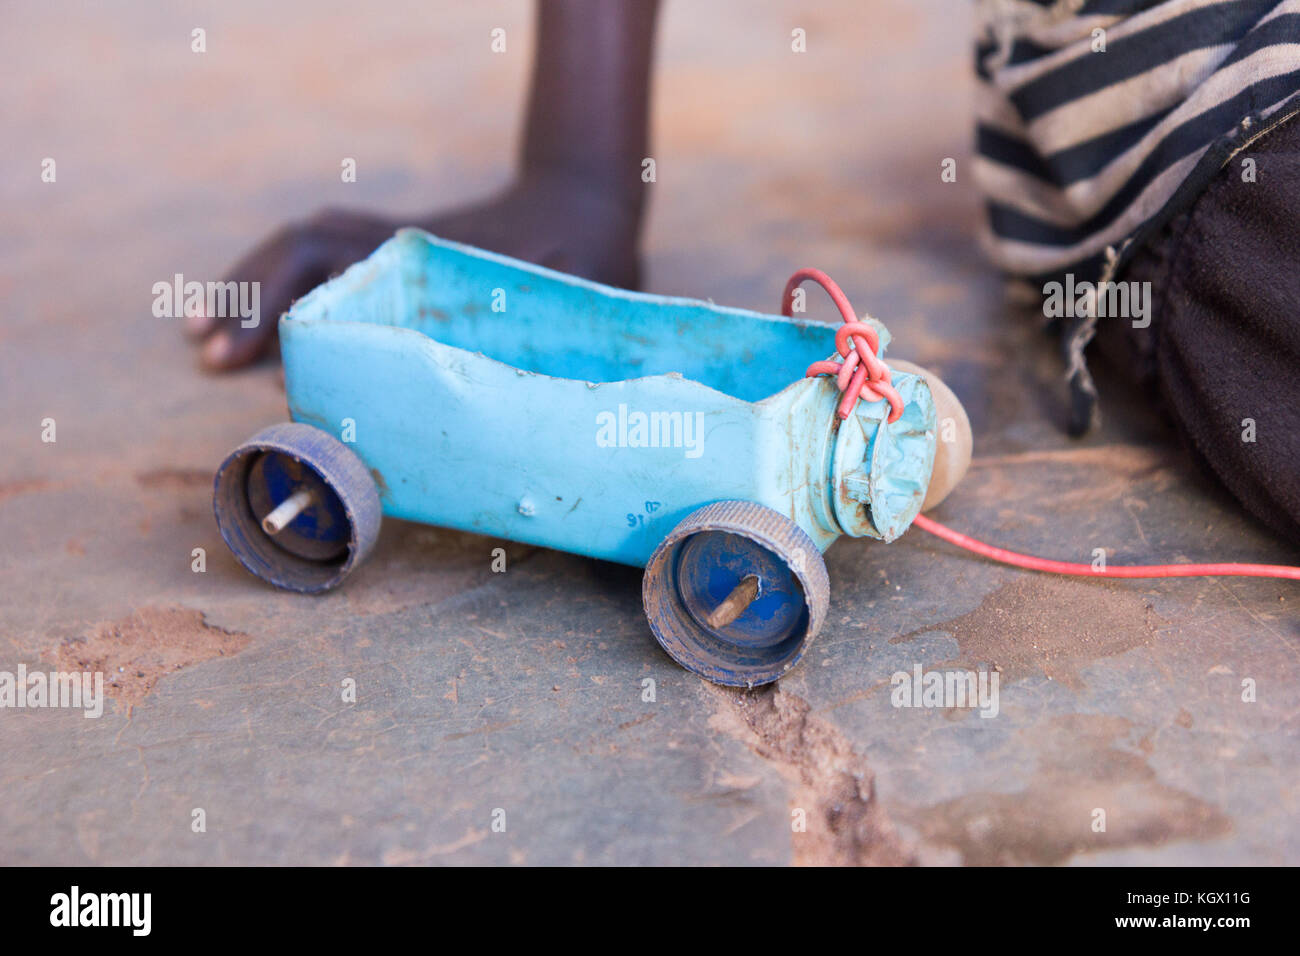 A simple toy car made of a plastic box, bottle caps and skewer sticks. Photo taken in Najja, Uganda on 9 May 2017. Stock Photo